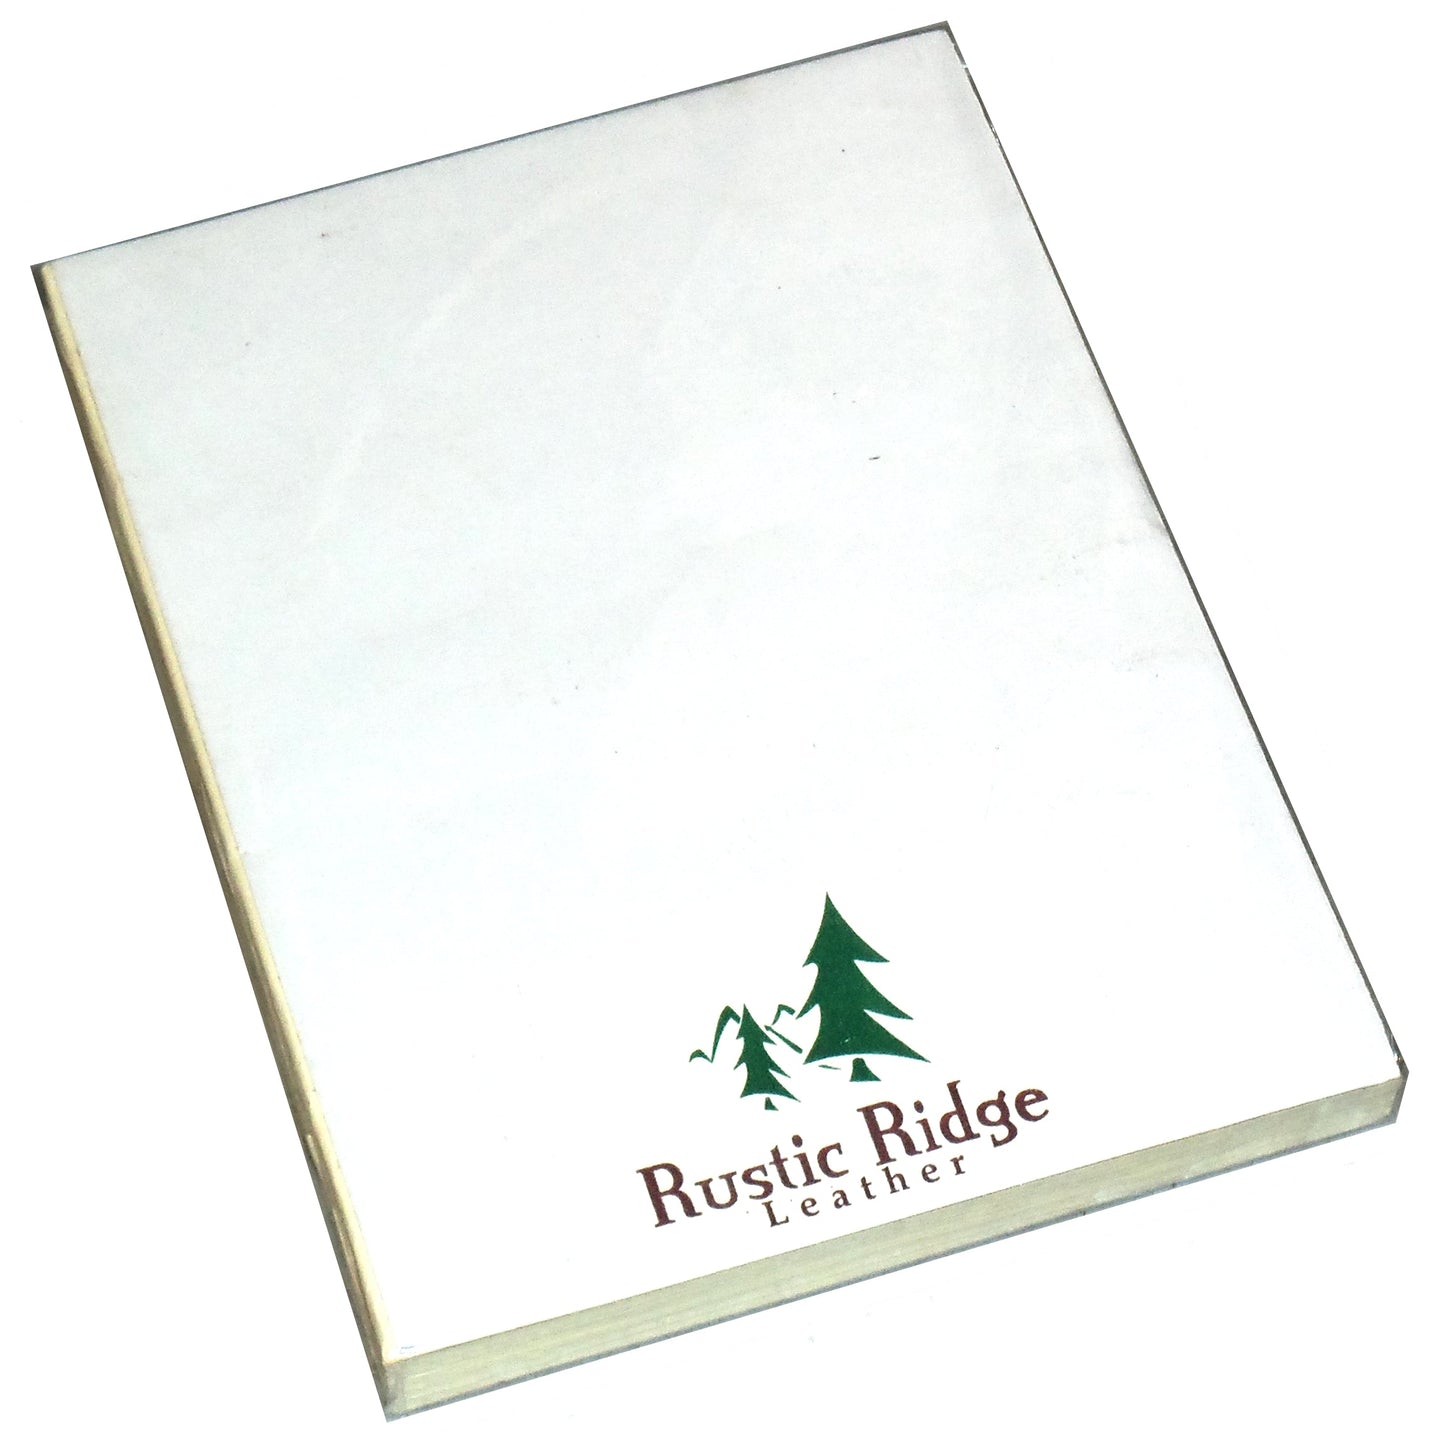 6x8" Journal Refill - Handmade Paper by Rustic Ridge, Unlined, Acid Free - 200 Pages - Rustic Ridge Leather